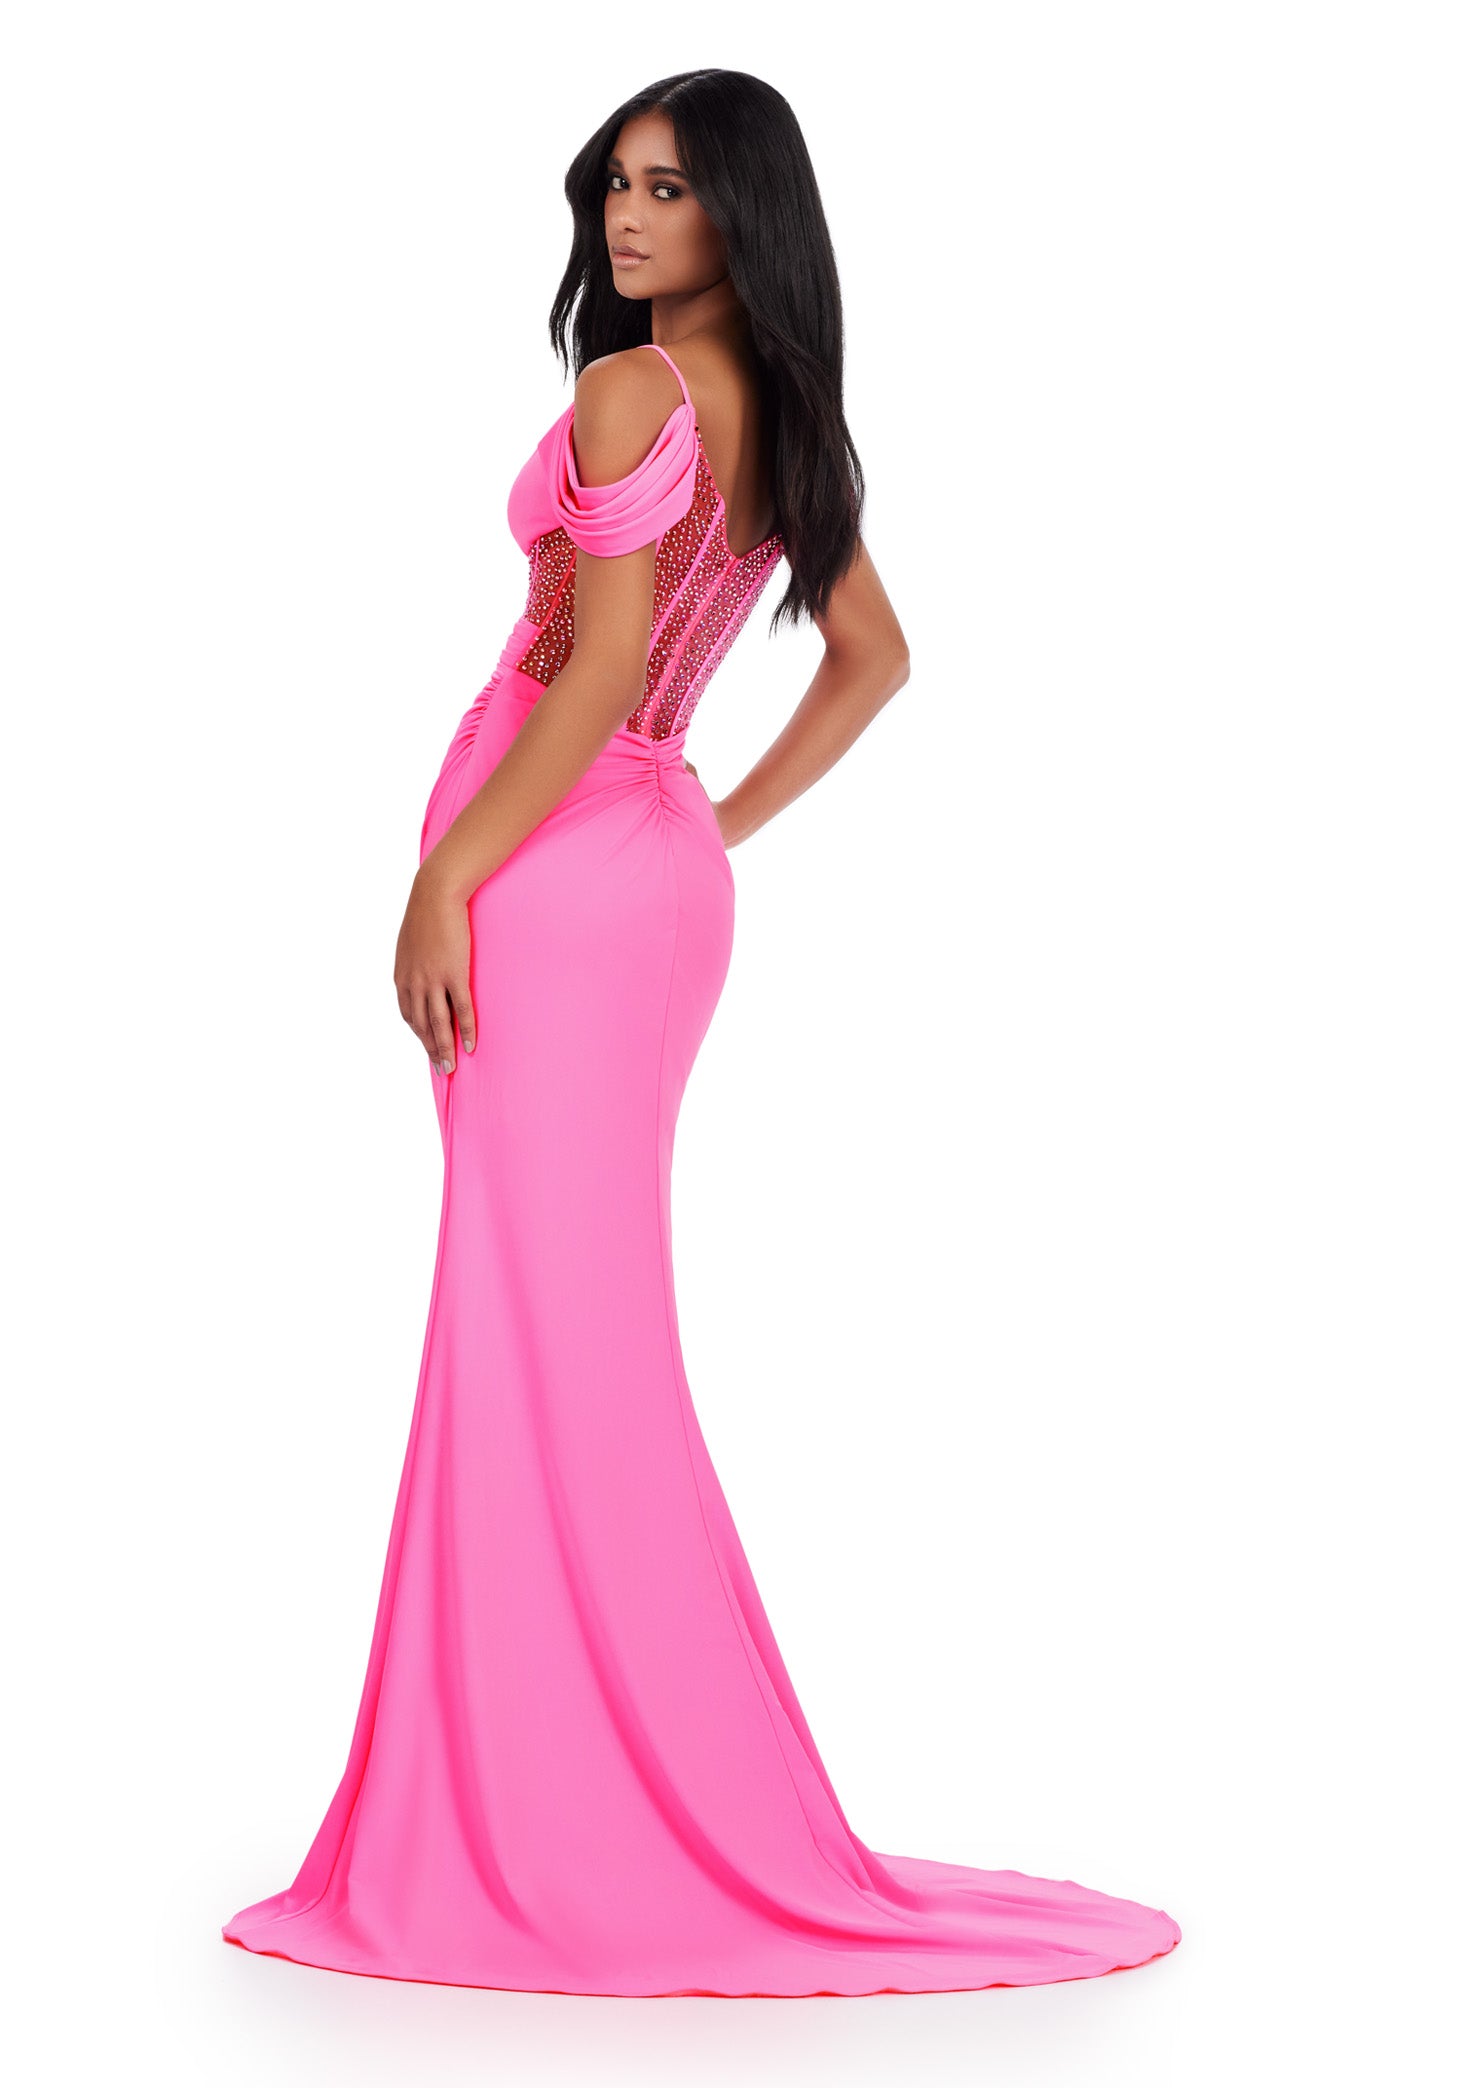 Indulge in timeless elegance with the Ashley Lauren 11536 Long Prom Dress. The spaghetti strap jersey gown features exposed corset boning for a flattering fit, while the formal pageant gown showcases your sophistication. Make a lasting impression with this stunning dress. A jersey gown with a twist! This dress features a spaghetti strap design with off shoulder details. The star of the show? The exposed beaded corset boning to add an extra sense of glam to this look.